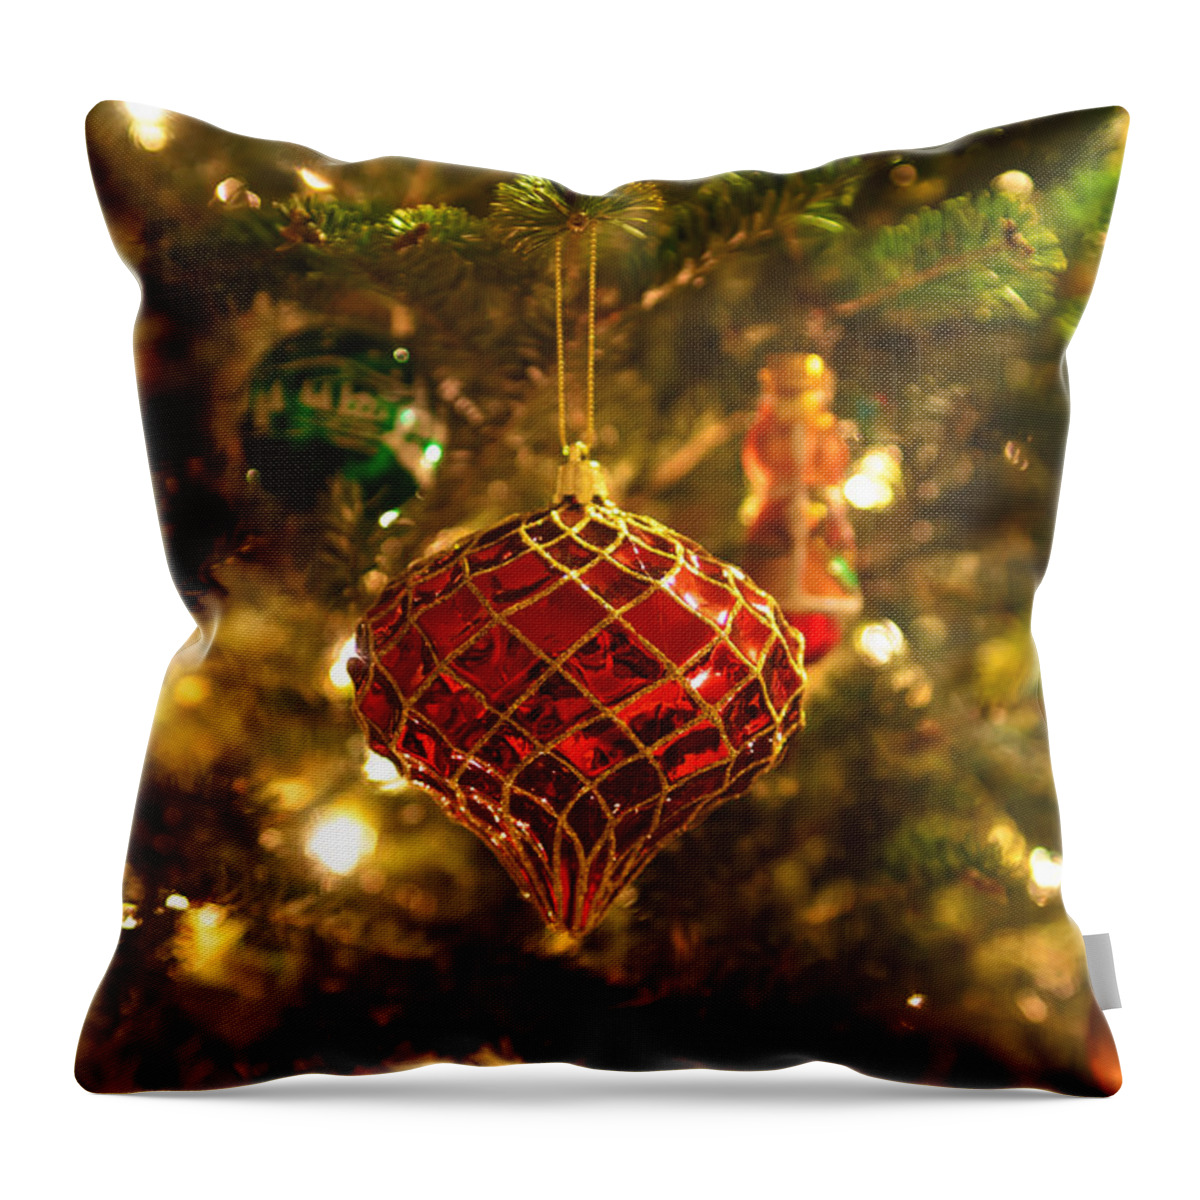 Artificial Throw Pillow featuring the photograph Christmas Tree Ornaments #6 by Alex Grichenko